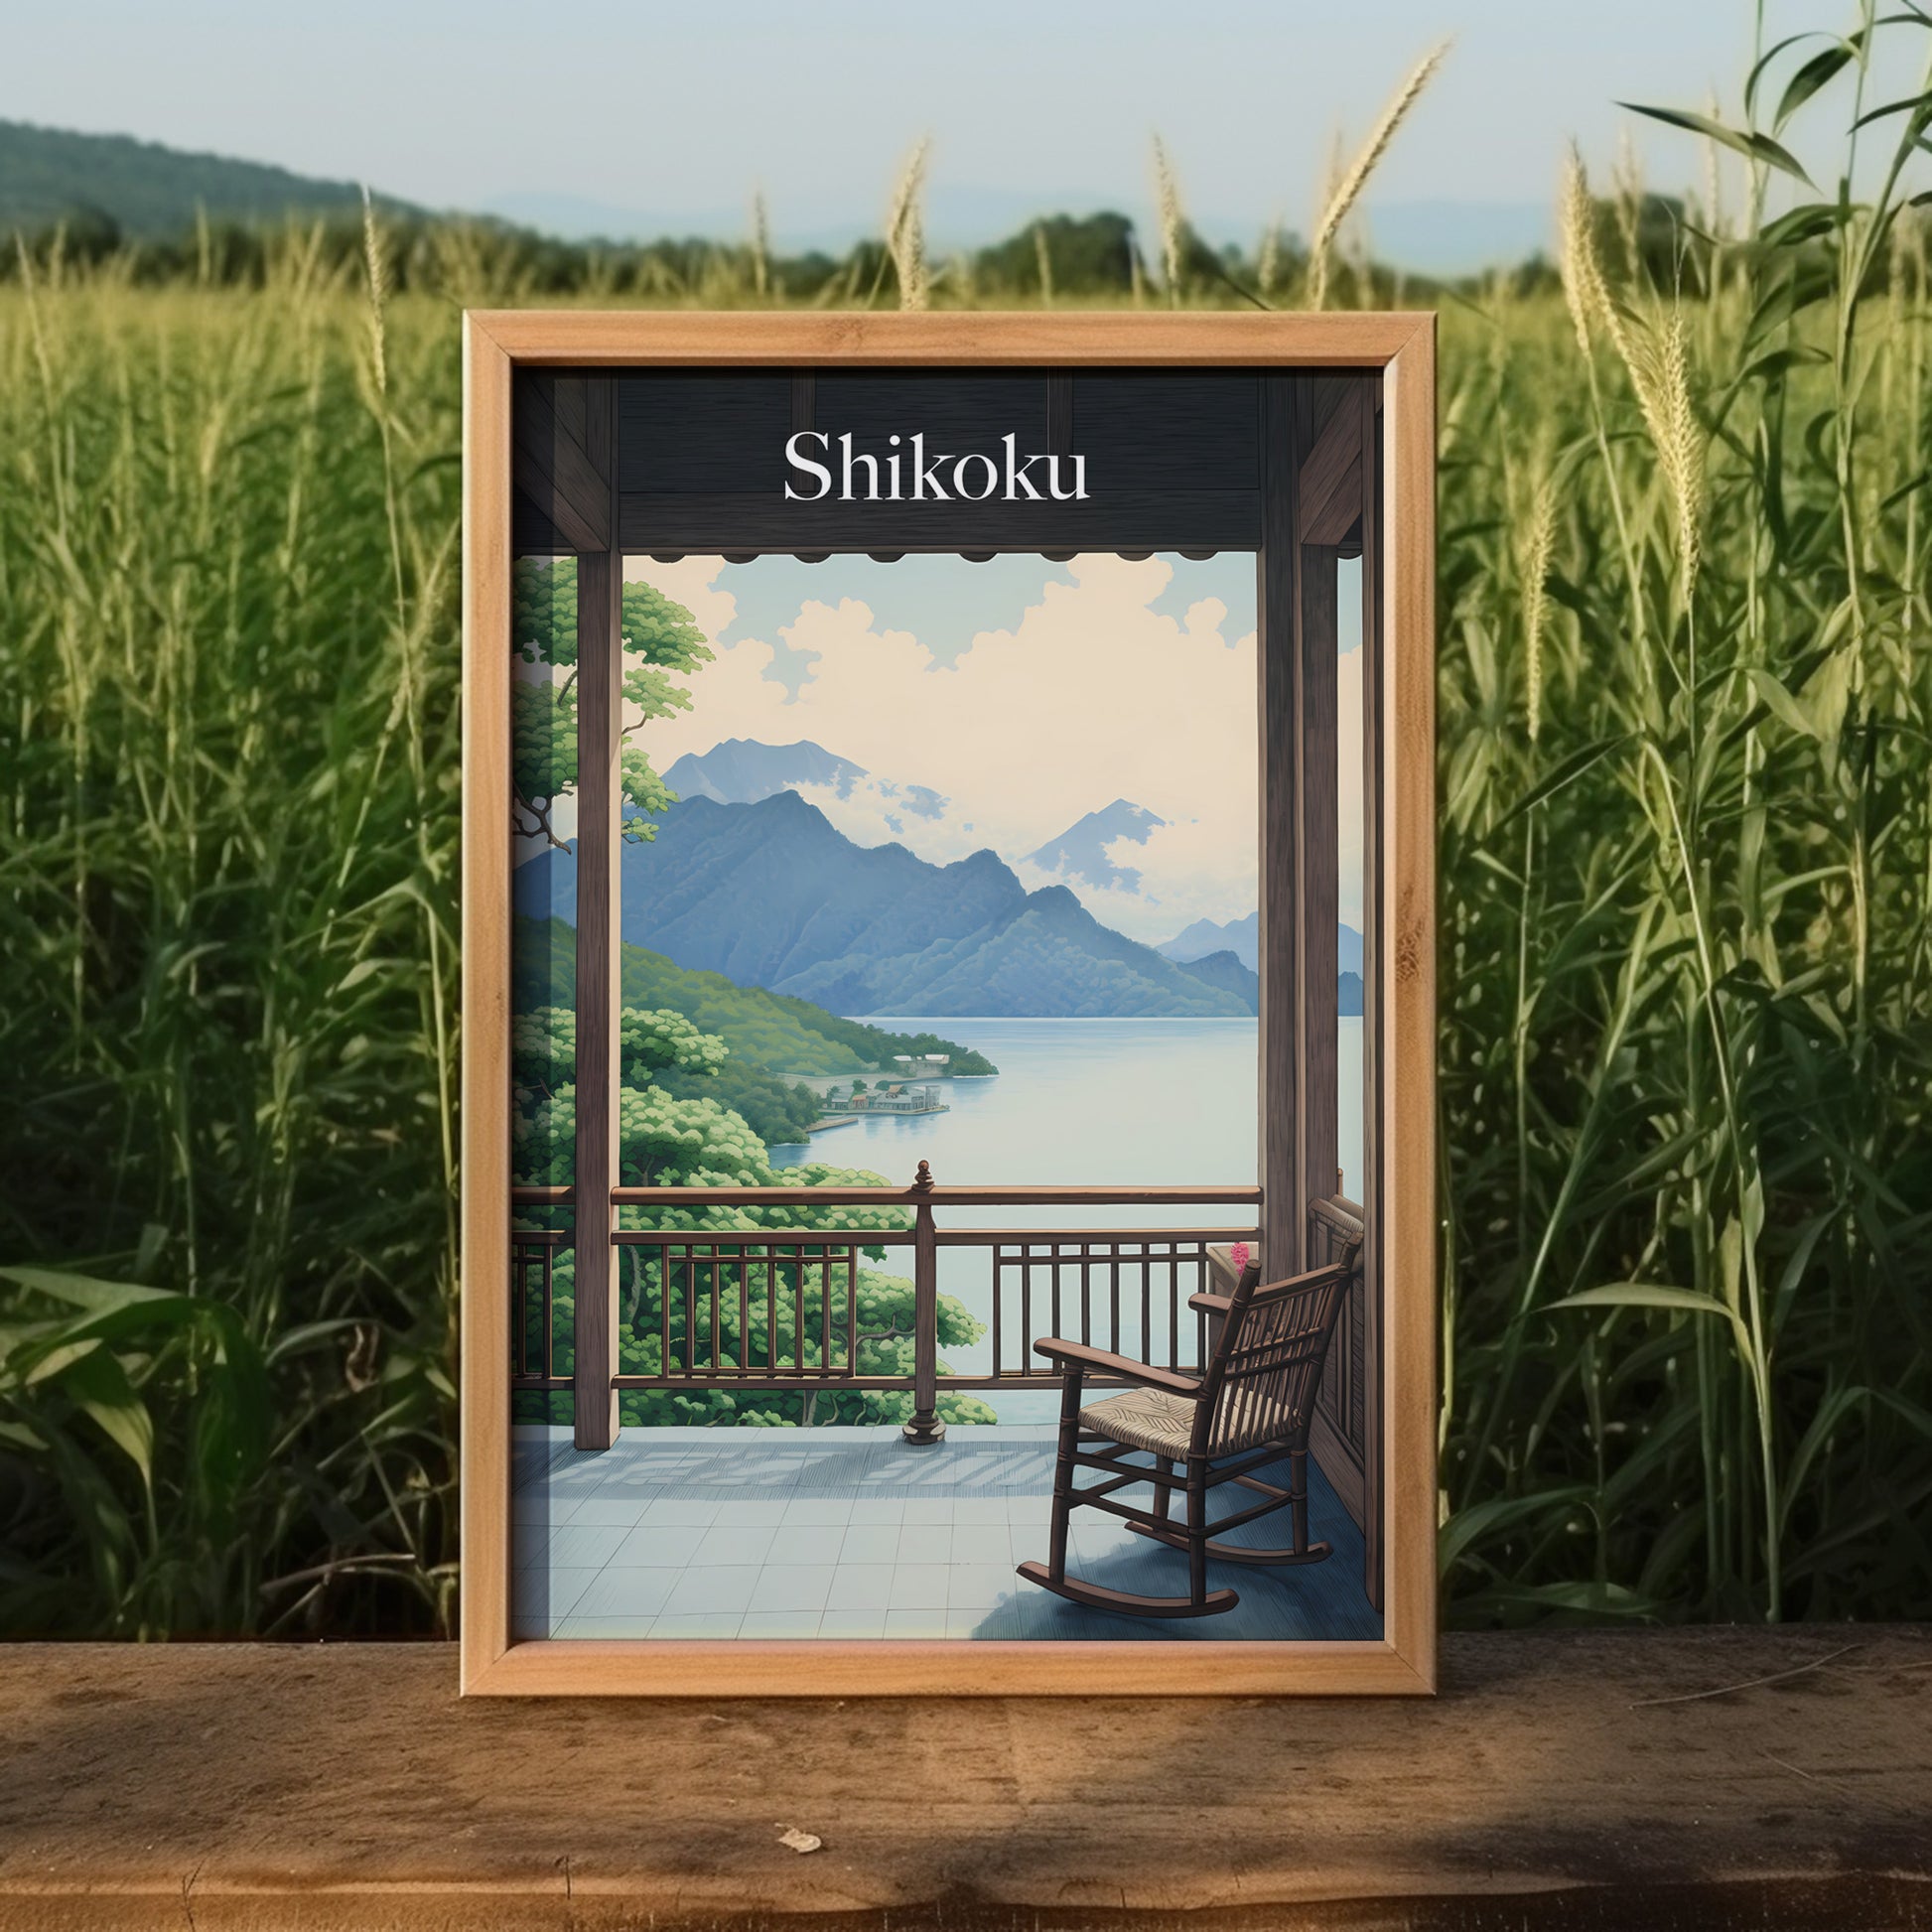 An illustrated poster of Shikoku with mountains and a lake viewed through an open door, with a rocking chair in front.